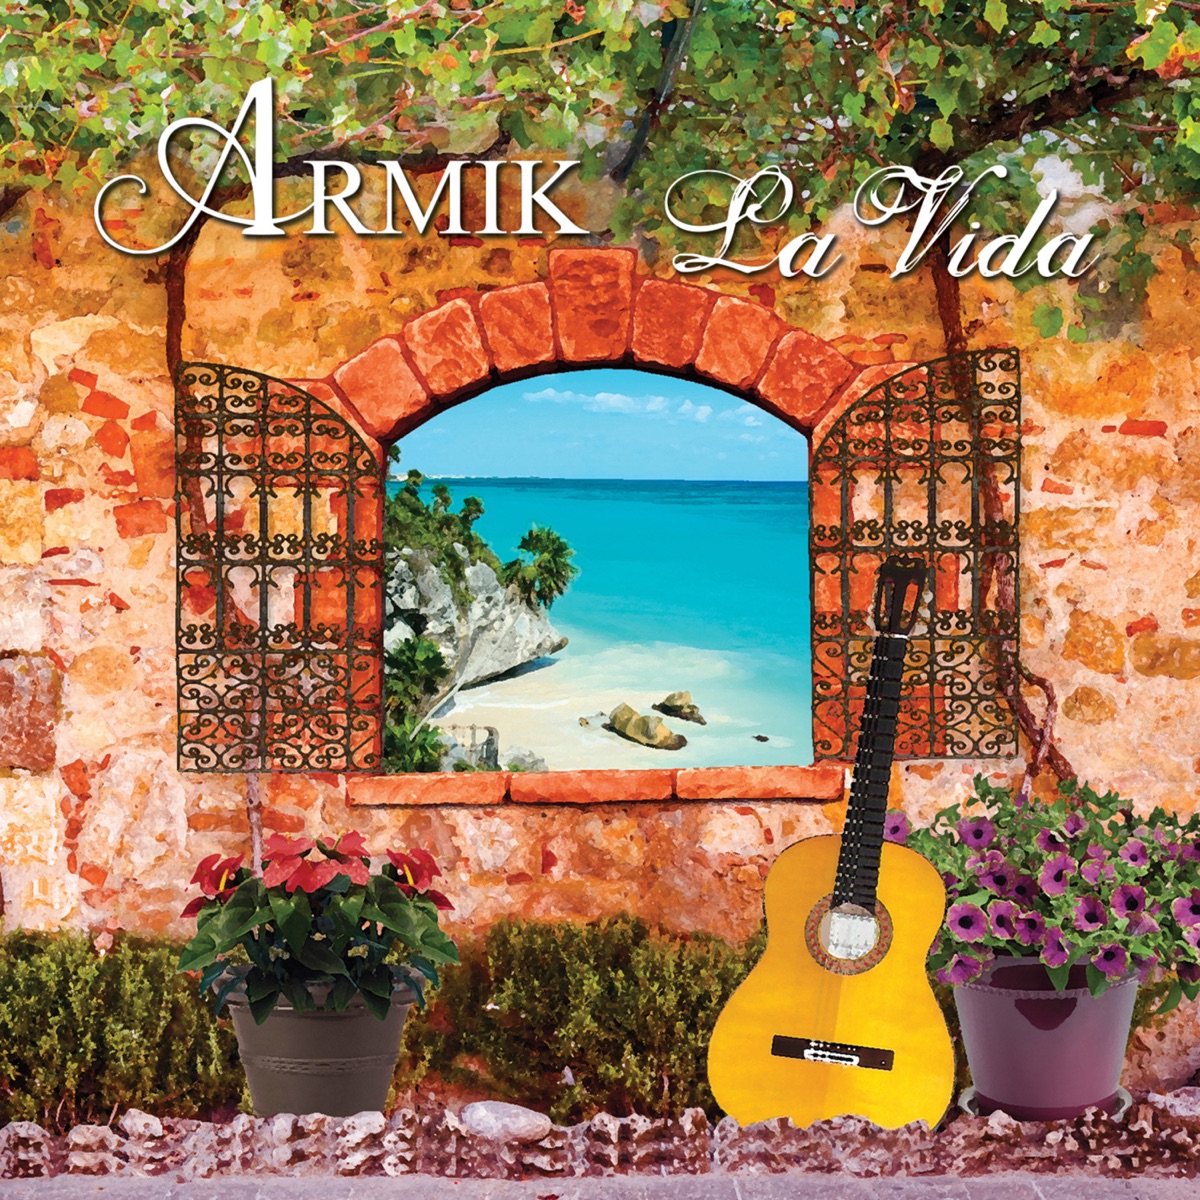 Solo Guitar Collection by Armik on Apple Music